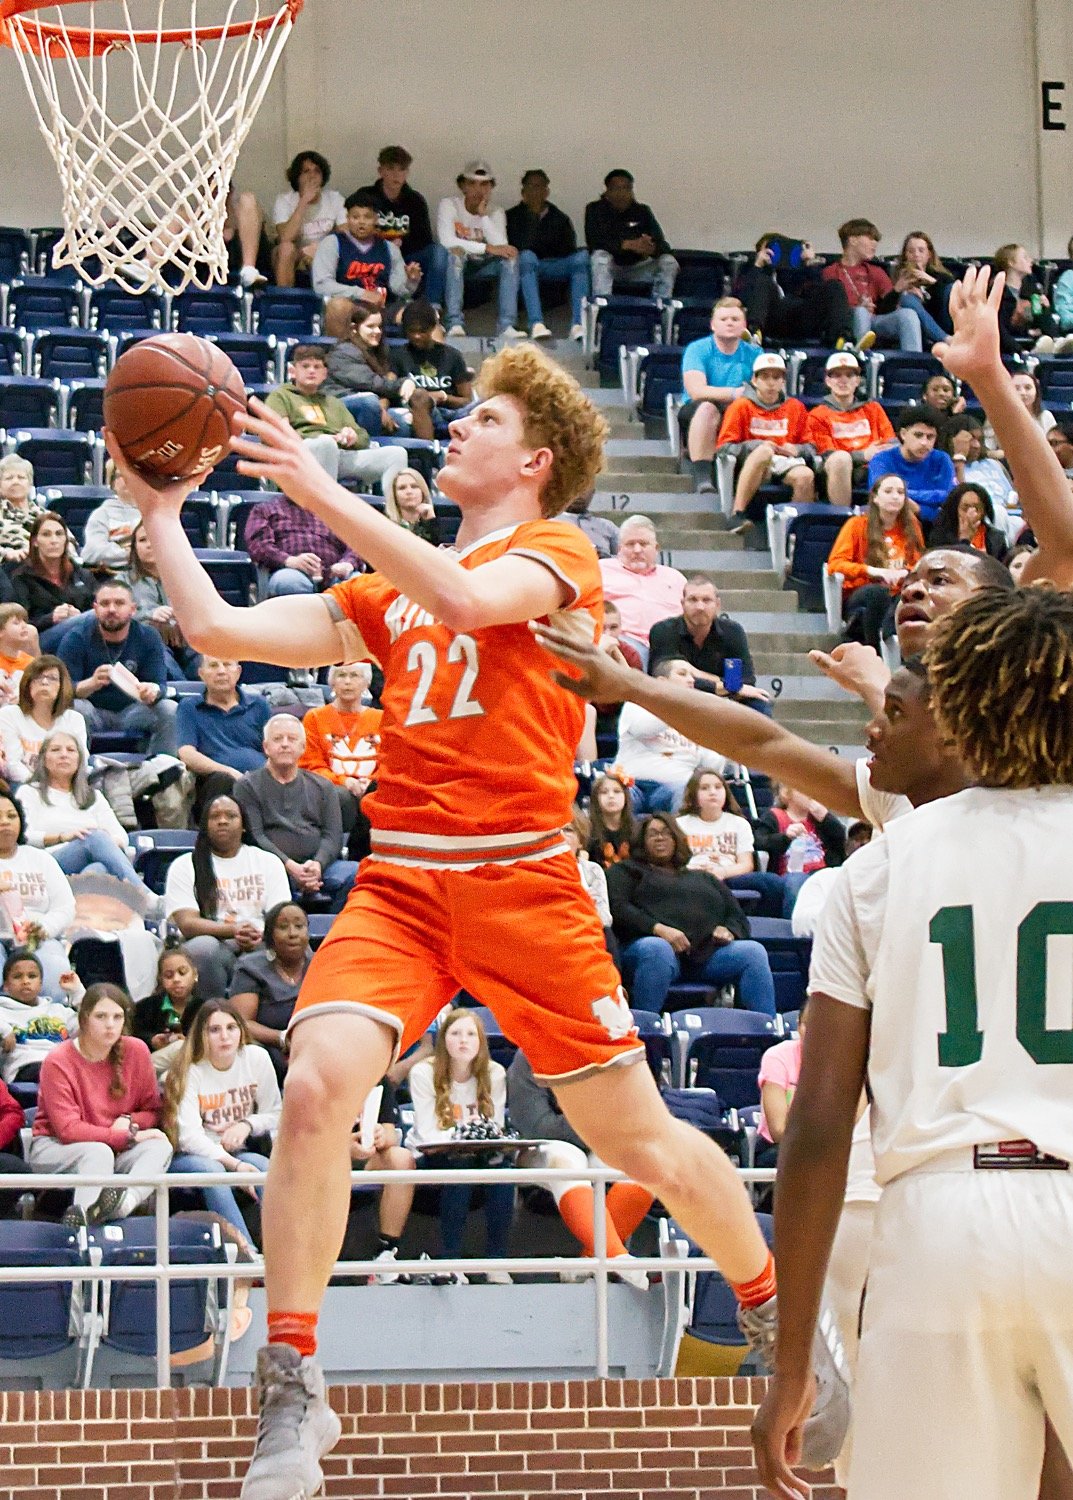 Dawson Pendergrass of Mineola goes in for a layup in the Yellowjackets’ 80-65 bidistrict victory Monday over Gateway Charter Academy from Dallas.